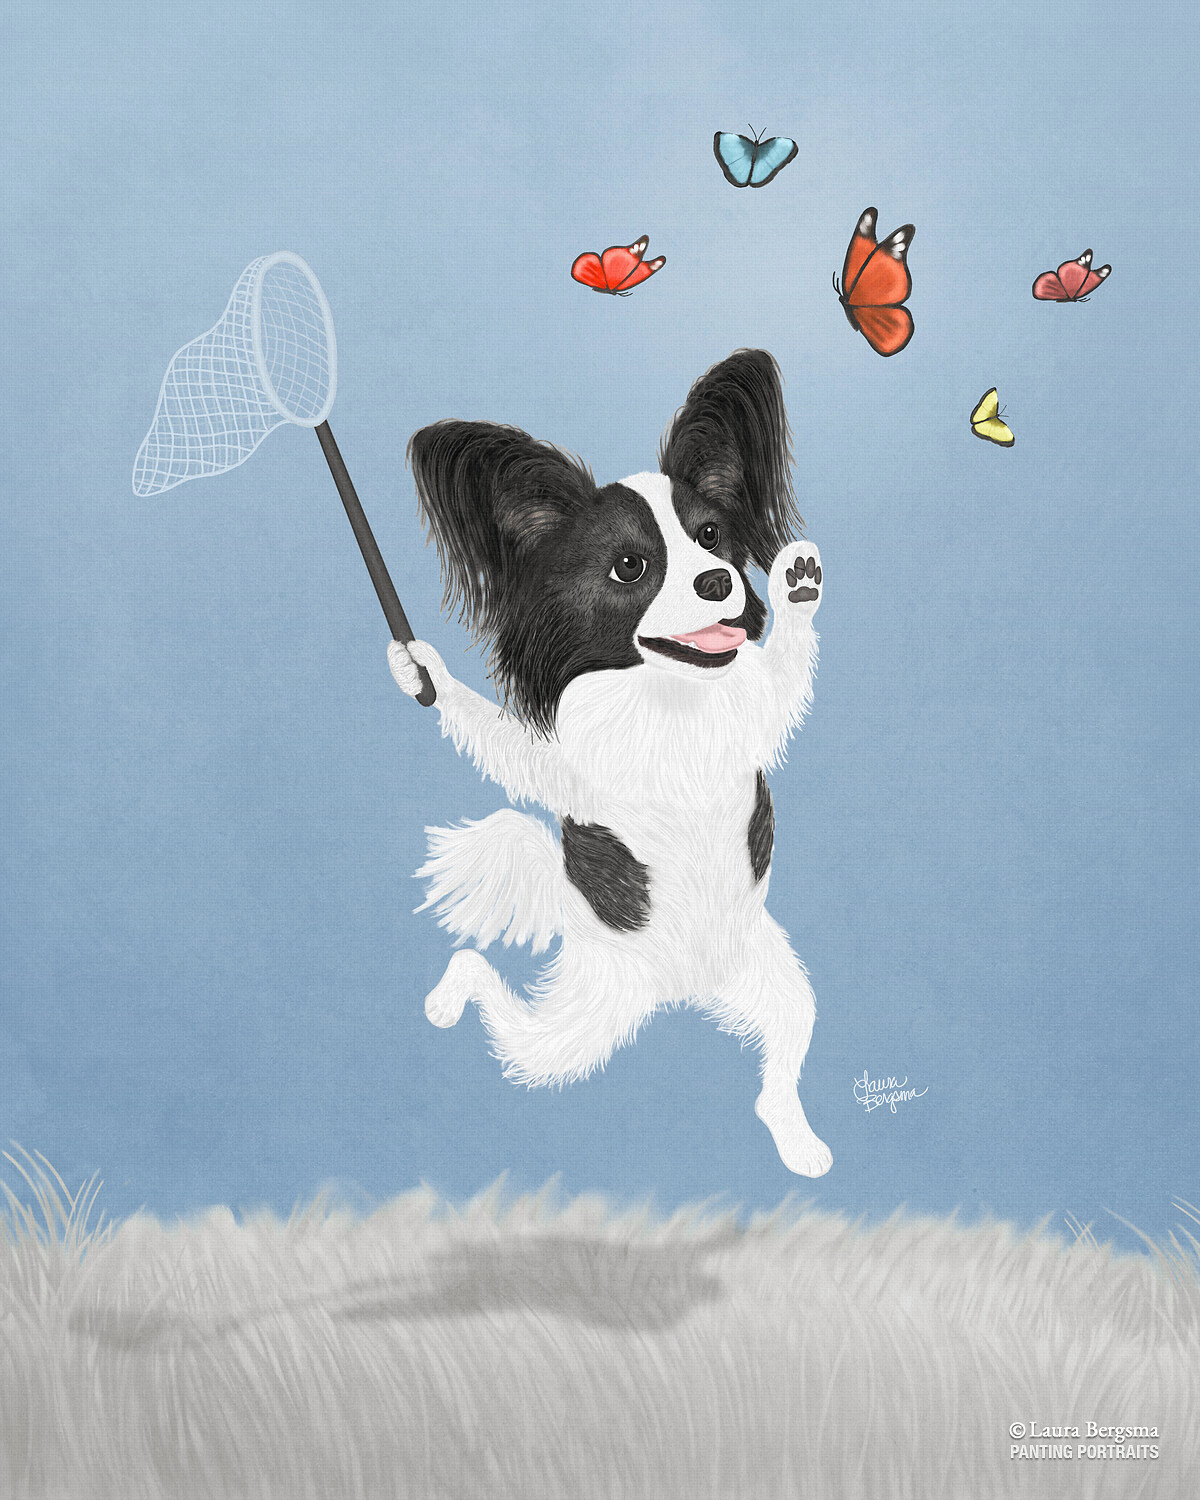 Winking Papillon Butterfly Dog Art Print by A.Lah Photo